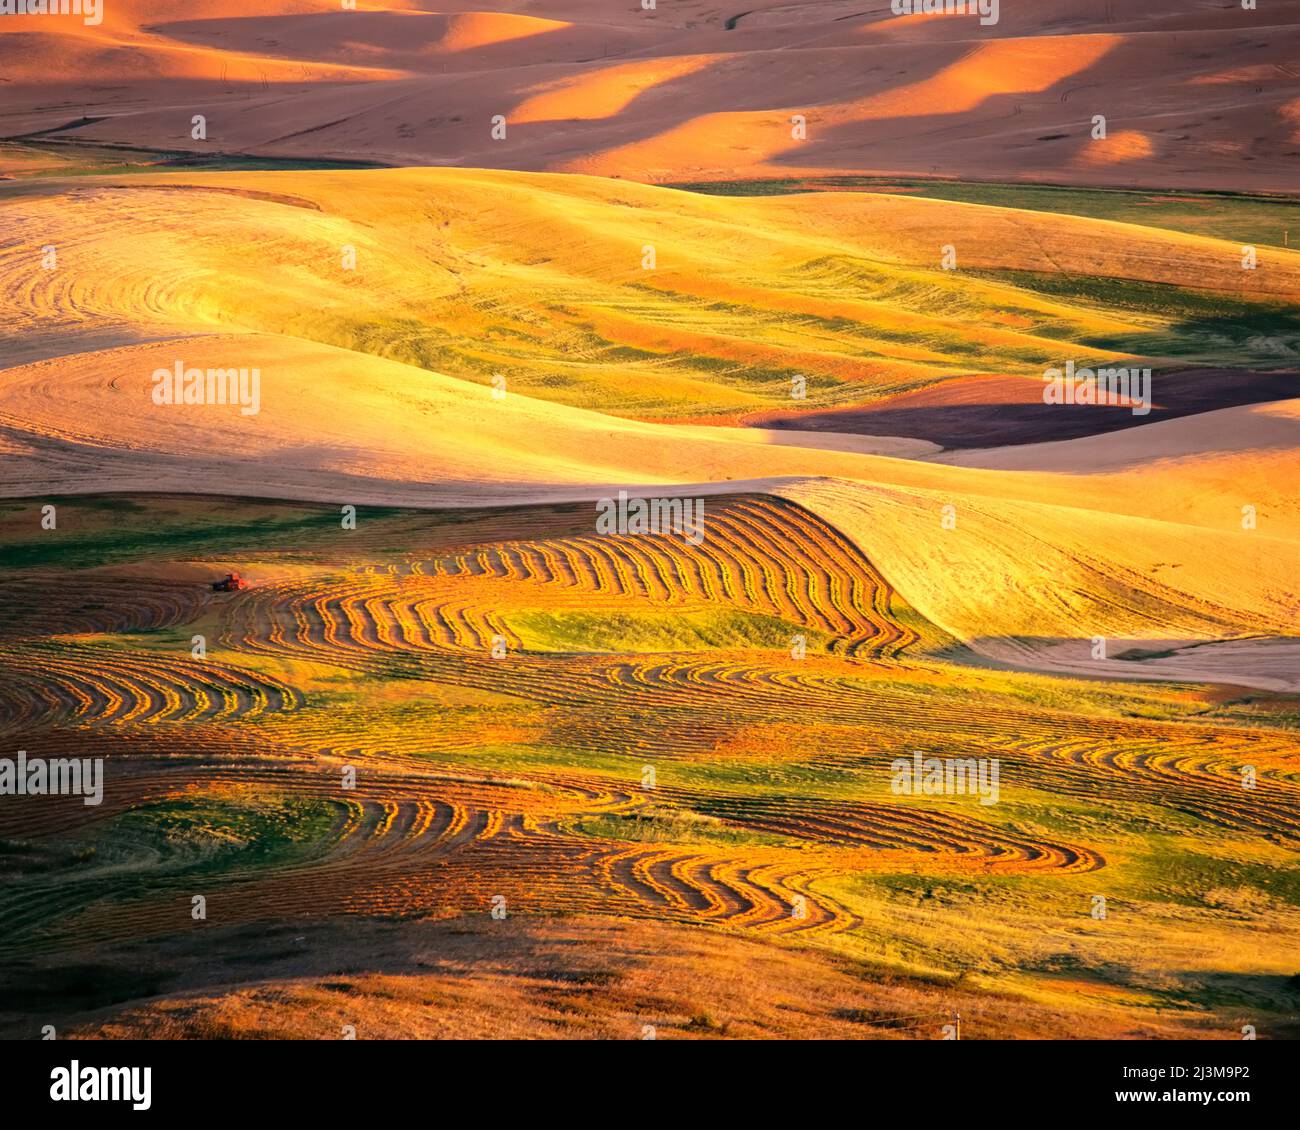 1995, Washington State, USA --- Croplands in the Palouse Hills --- Image by © Craig Tuttle/Corbis Stock Photo